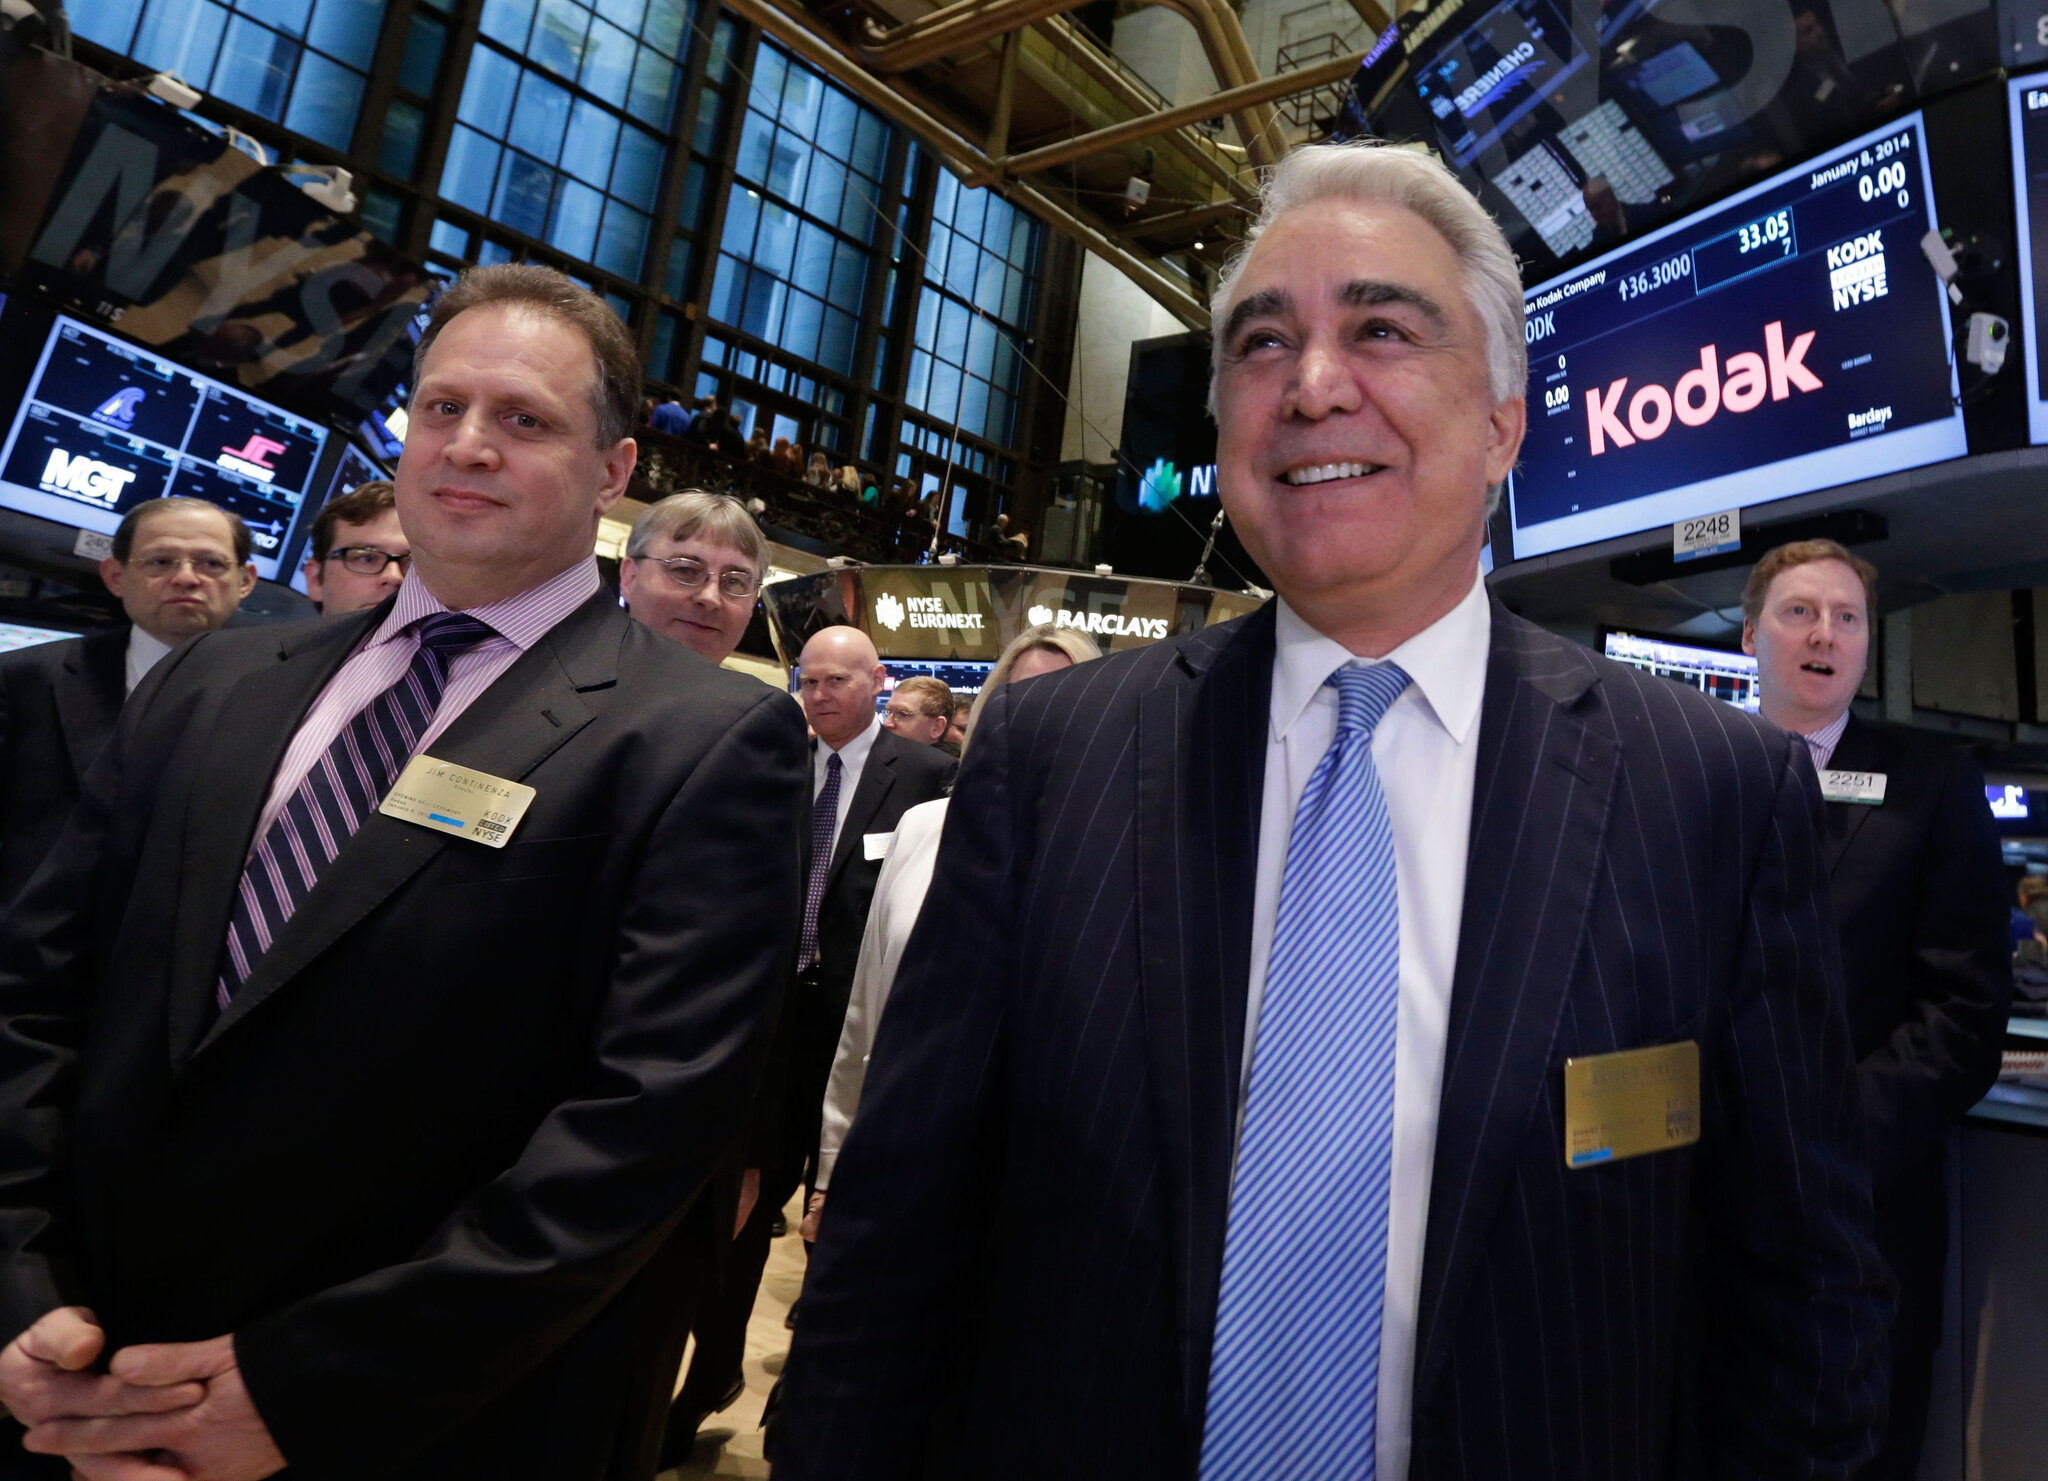 Kodak Announces its Own Cryptocurrency and Watches Stock Price Skyrocket - ASMP